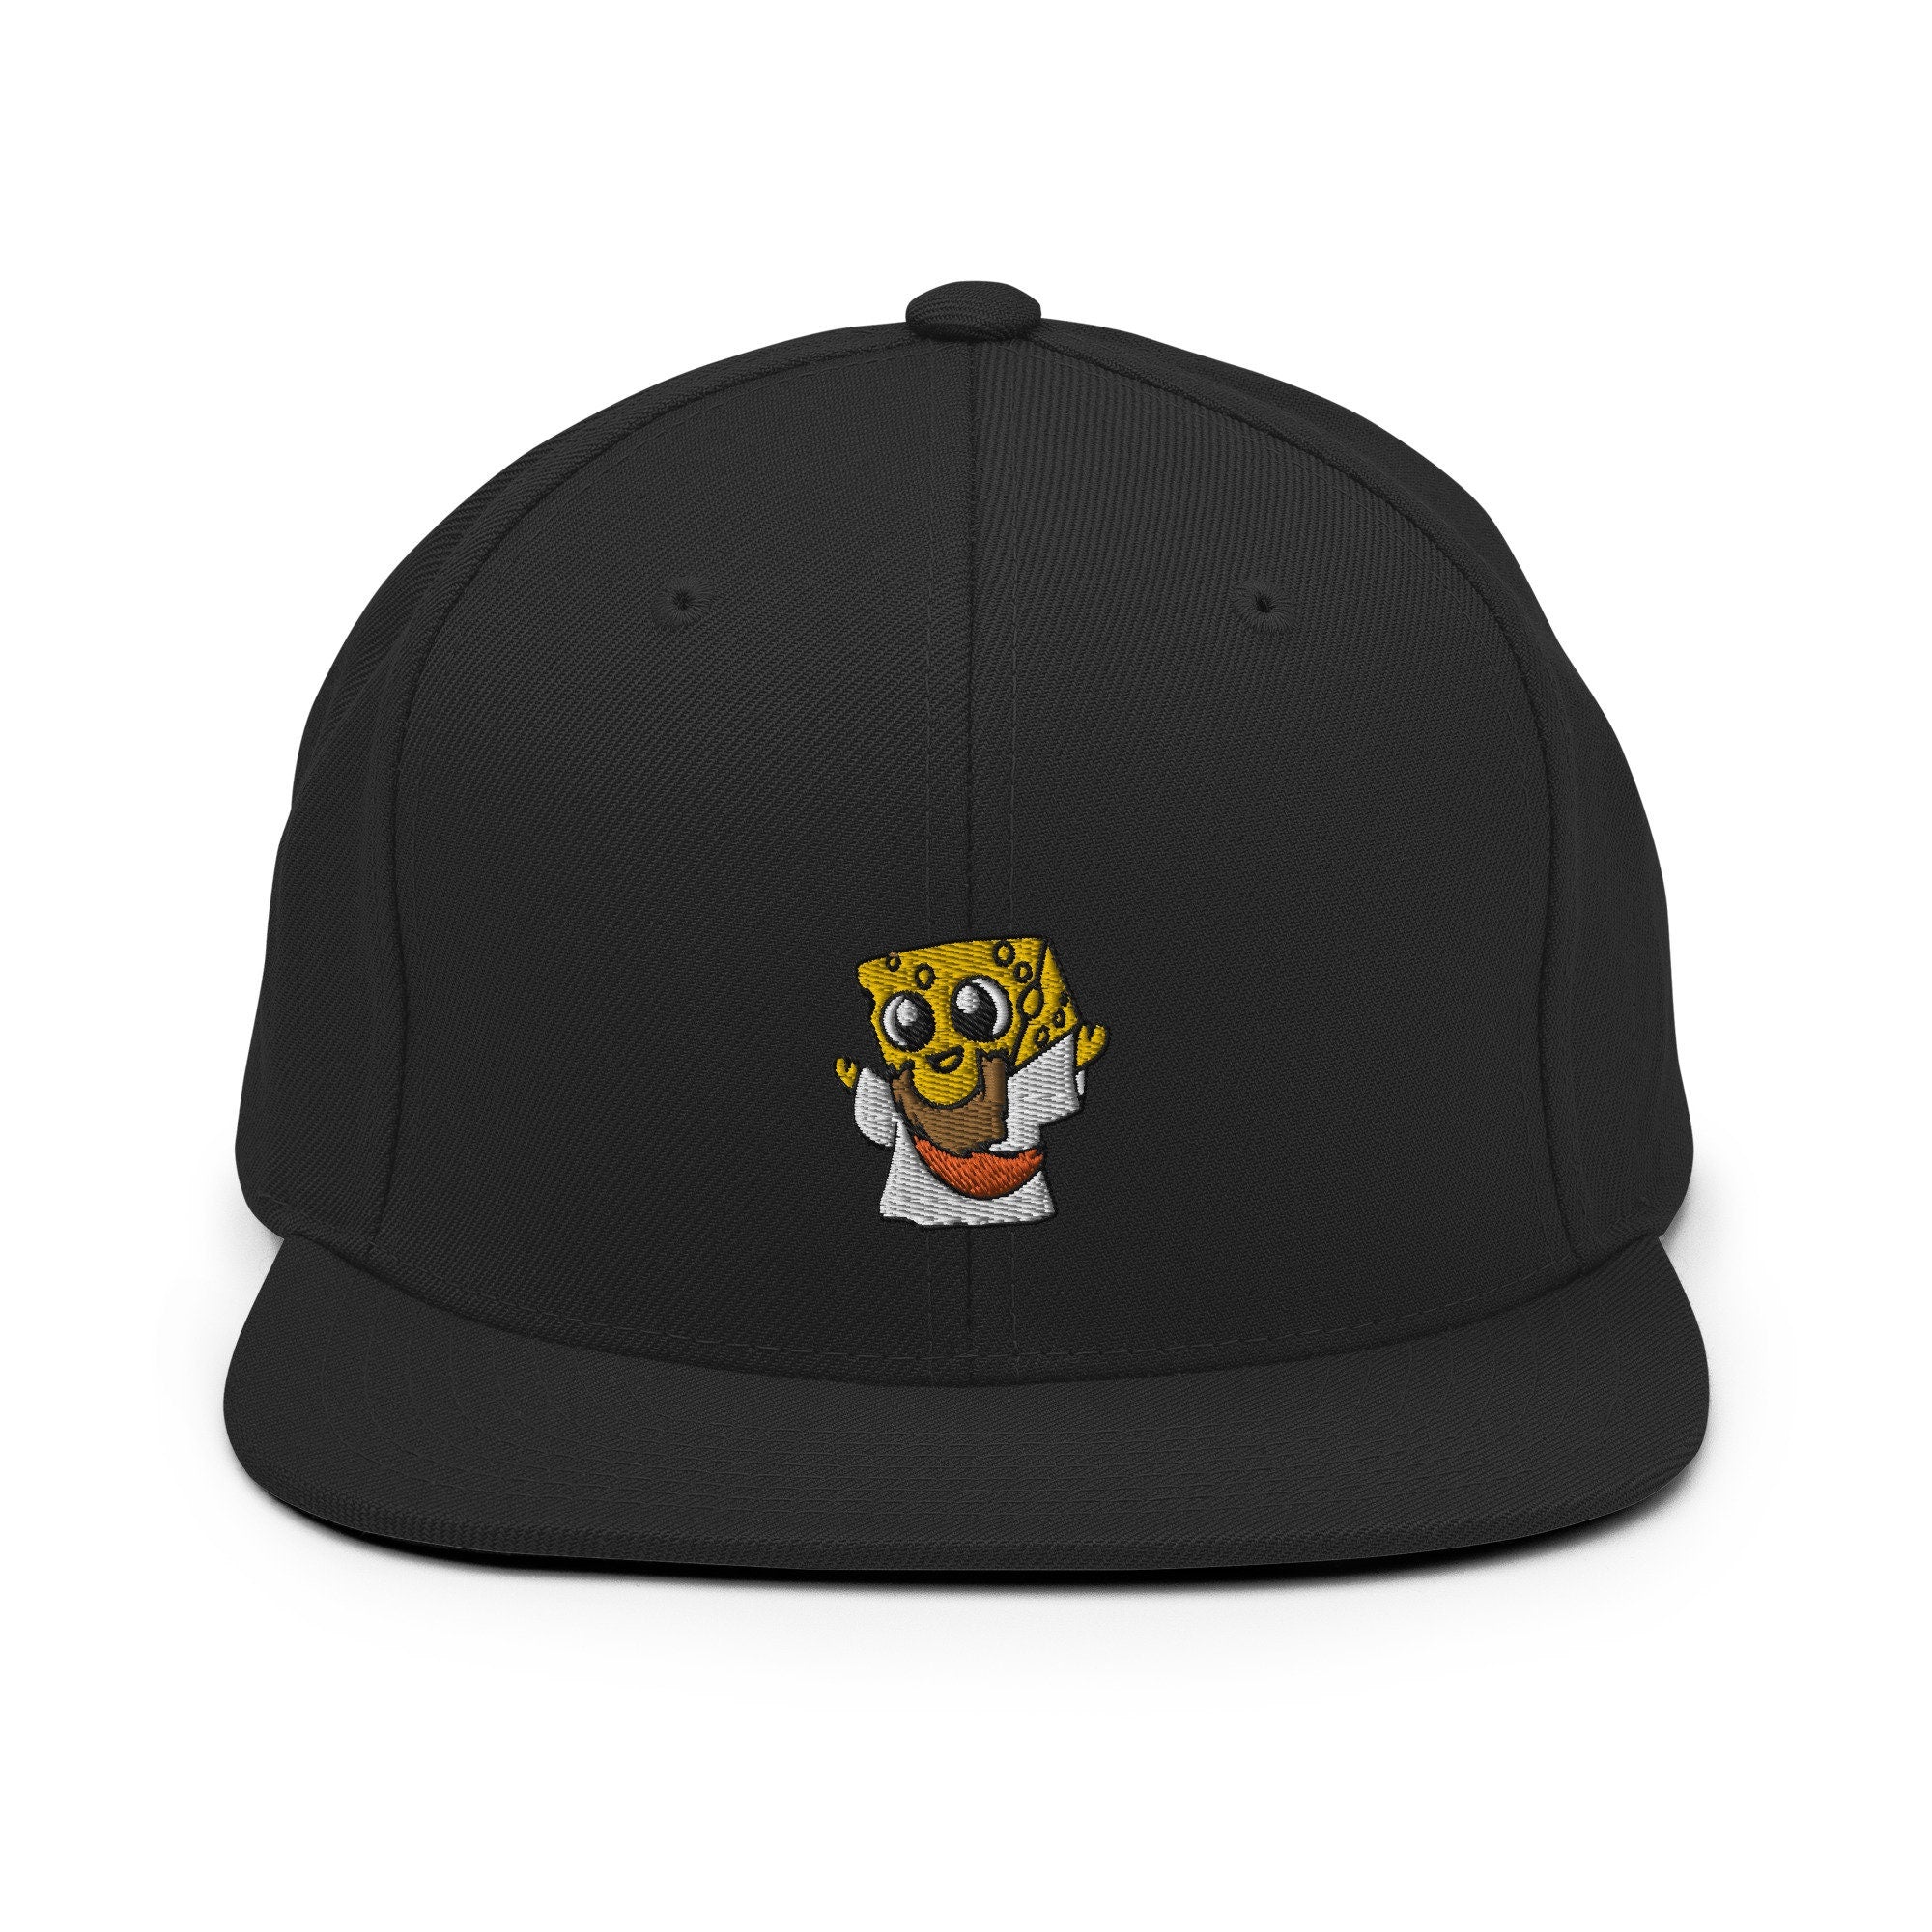 Cheesus Embroidered Snapback Hat, Cap Gift, Embroidered Snapback Hat, Flat Bill Snapback